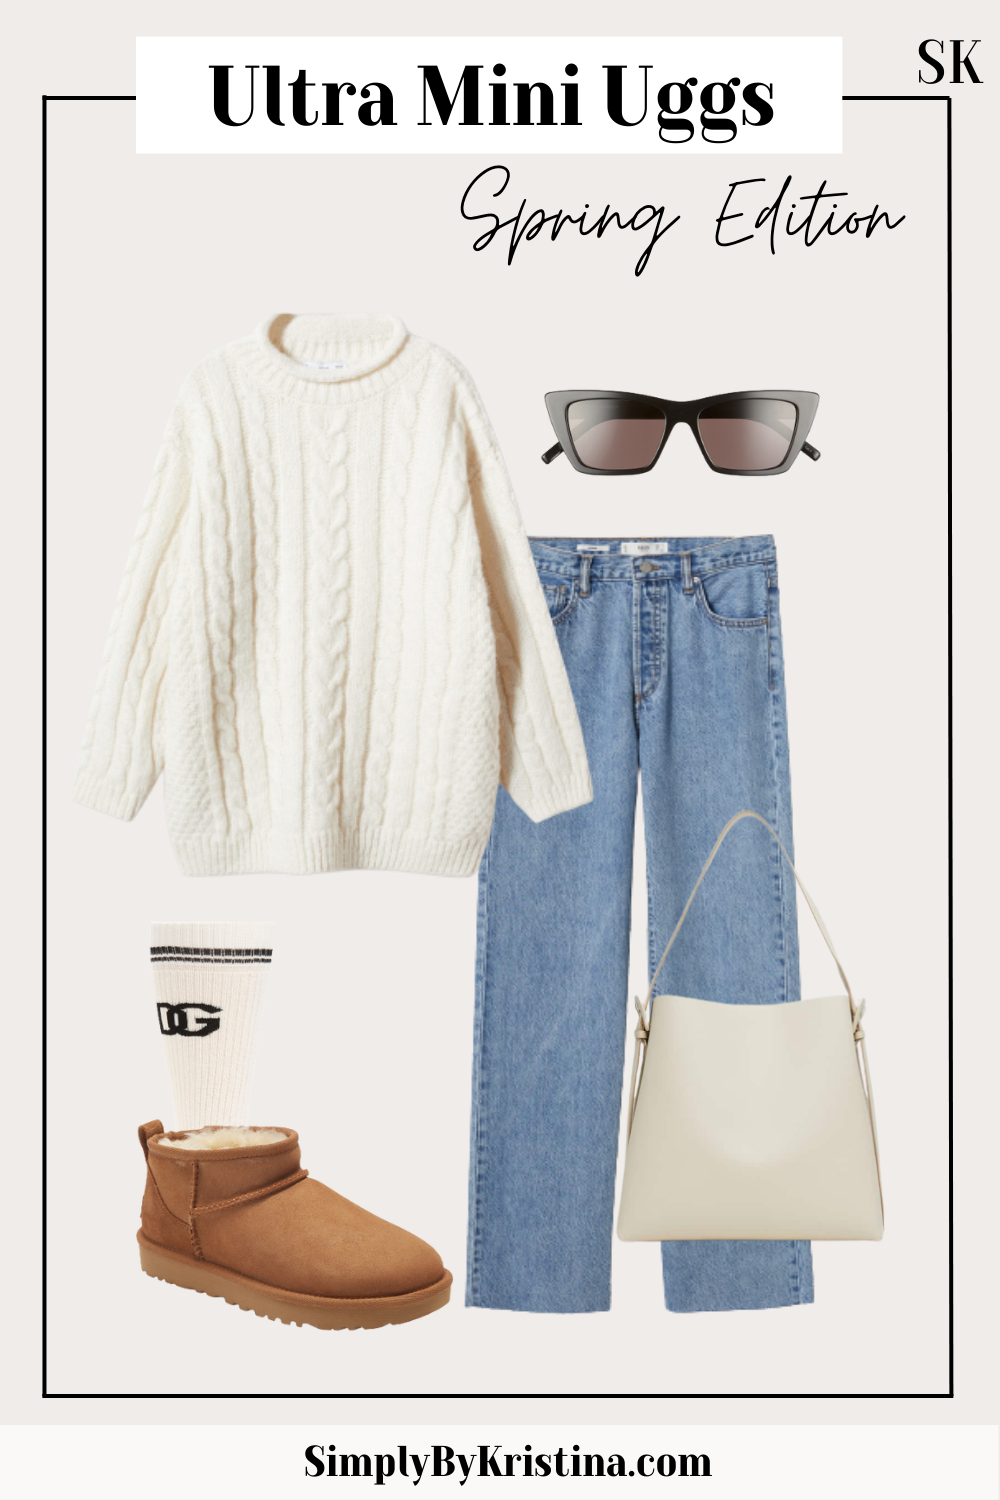 Beige Uggs with Leggings Relaxed Fall Outfits (3 ideas & outfits)